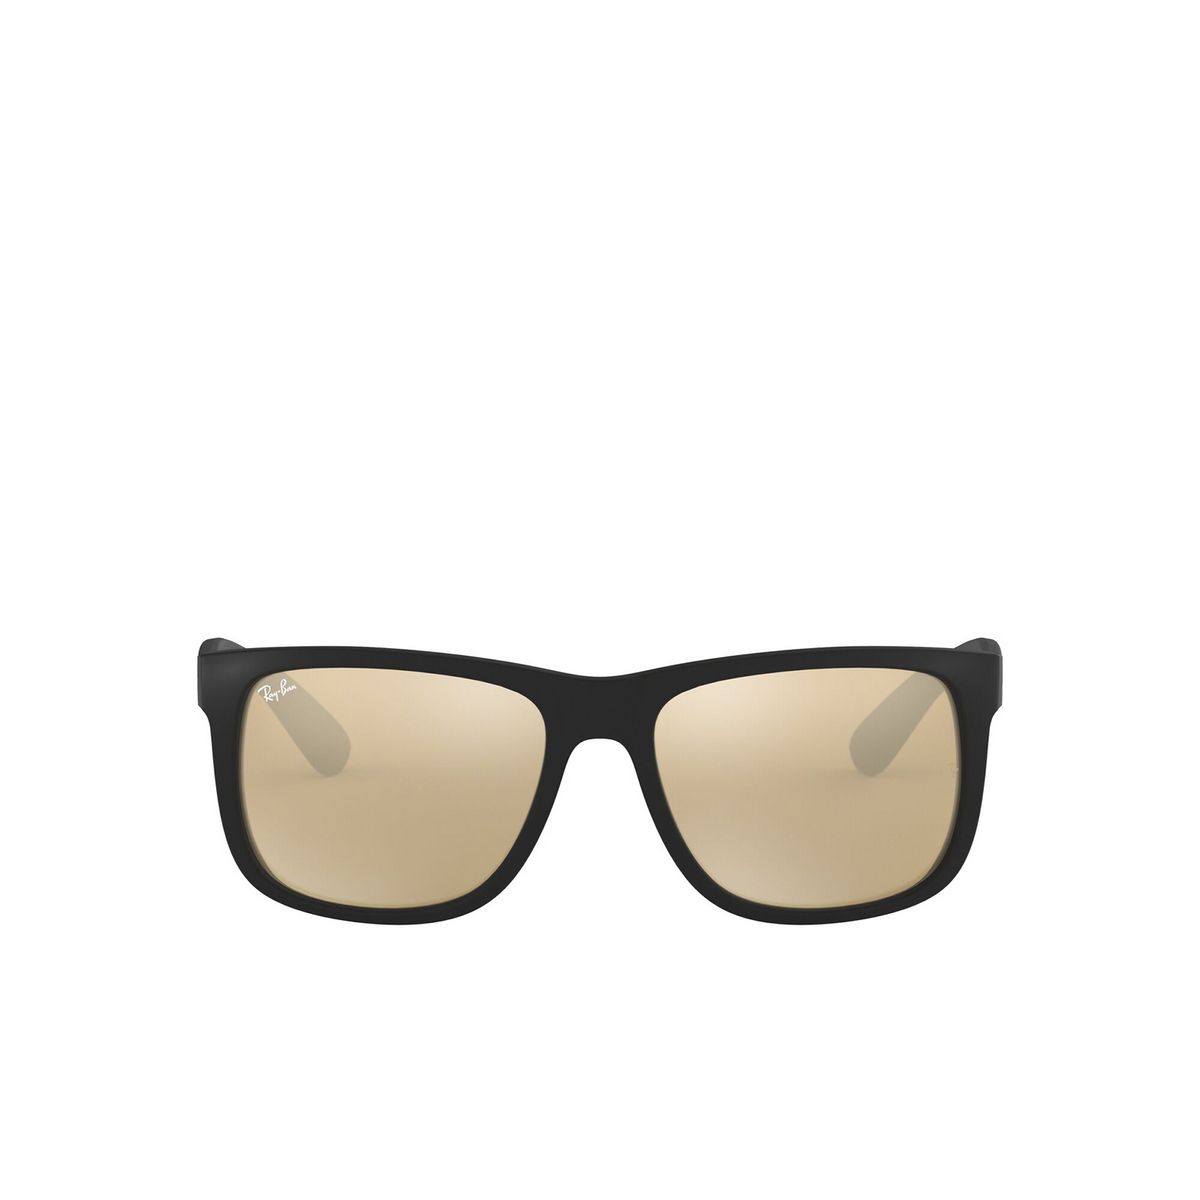 Ray-Ban® Square Sunglasses: Justin RB4165 color Rubber Black 622/5A - front view.